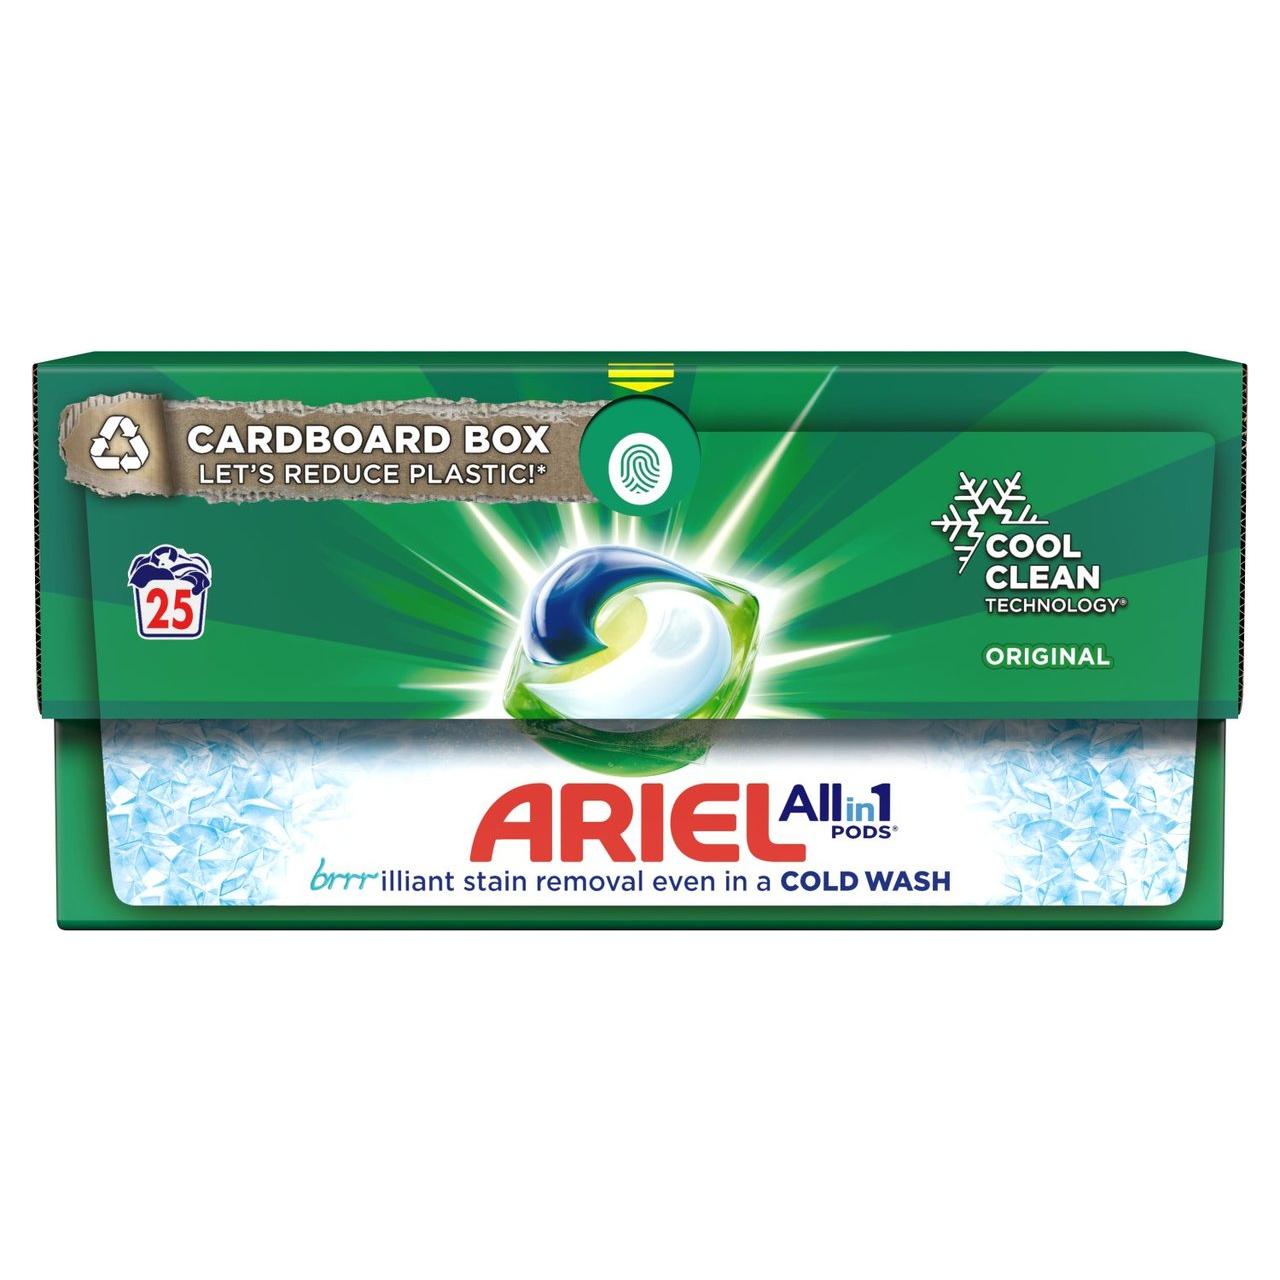 Ariel All in 1 PODS, Laundry Washing Capsules, Original 25 washes